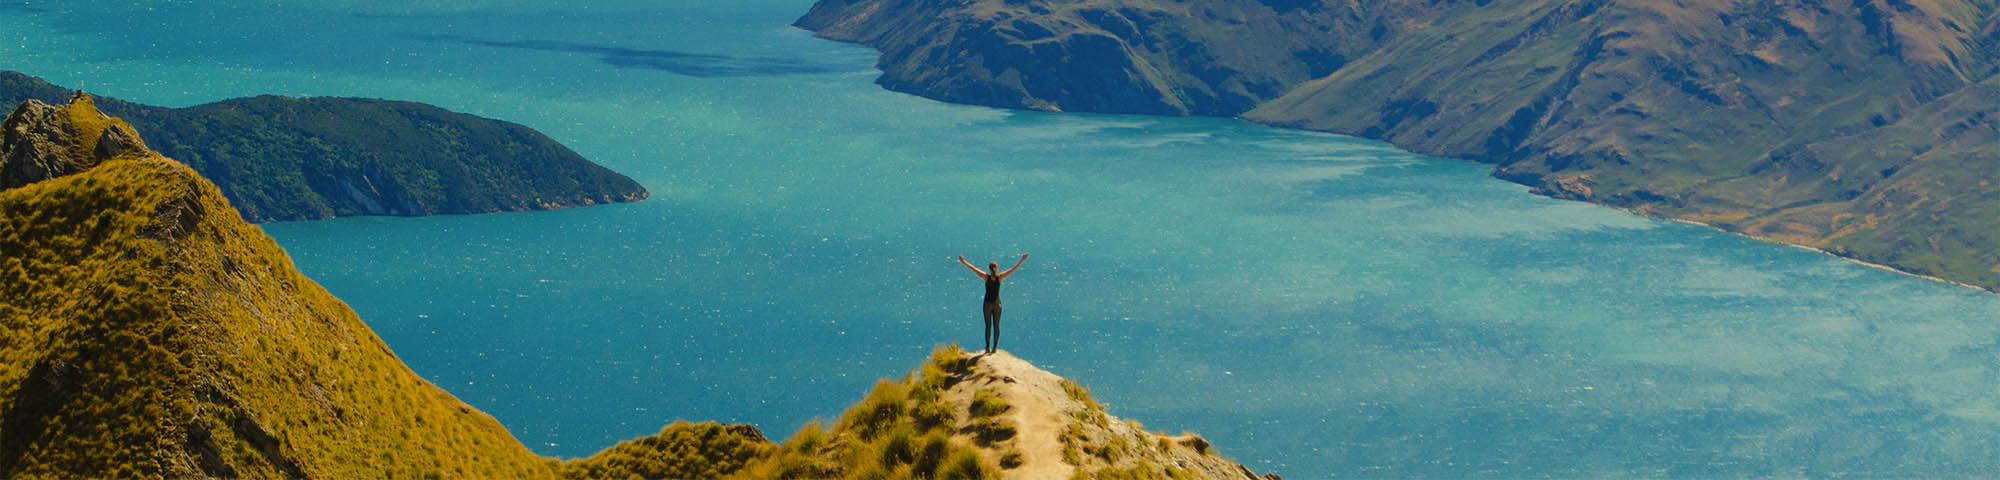 Inspirational NZ scenery promoting professional CV writers service for people in NZ and moving to NZ